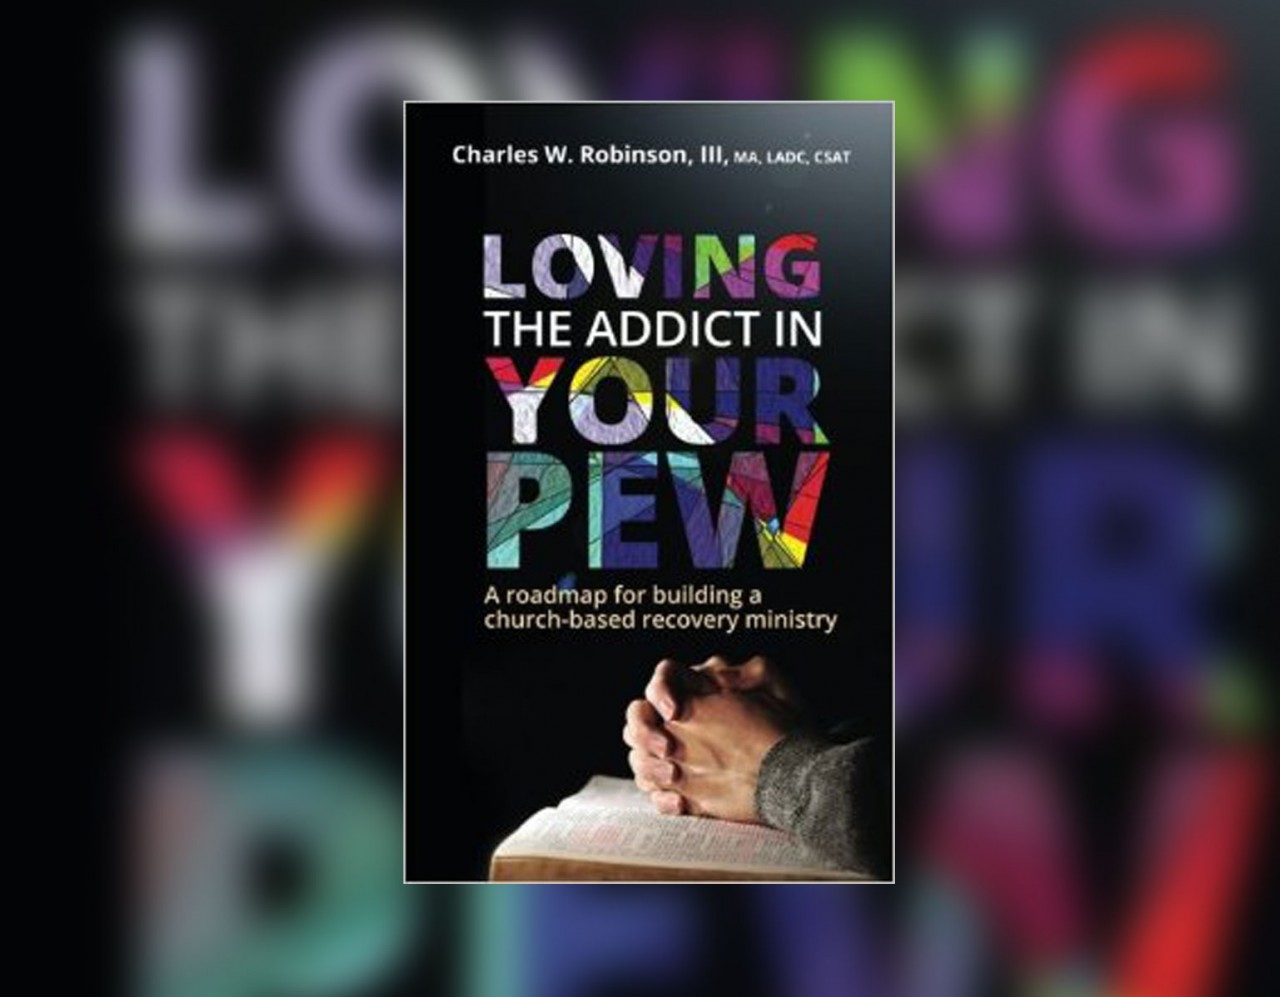 Messenger Insight 270 – Loving the Addict in Your Pew